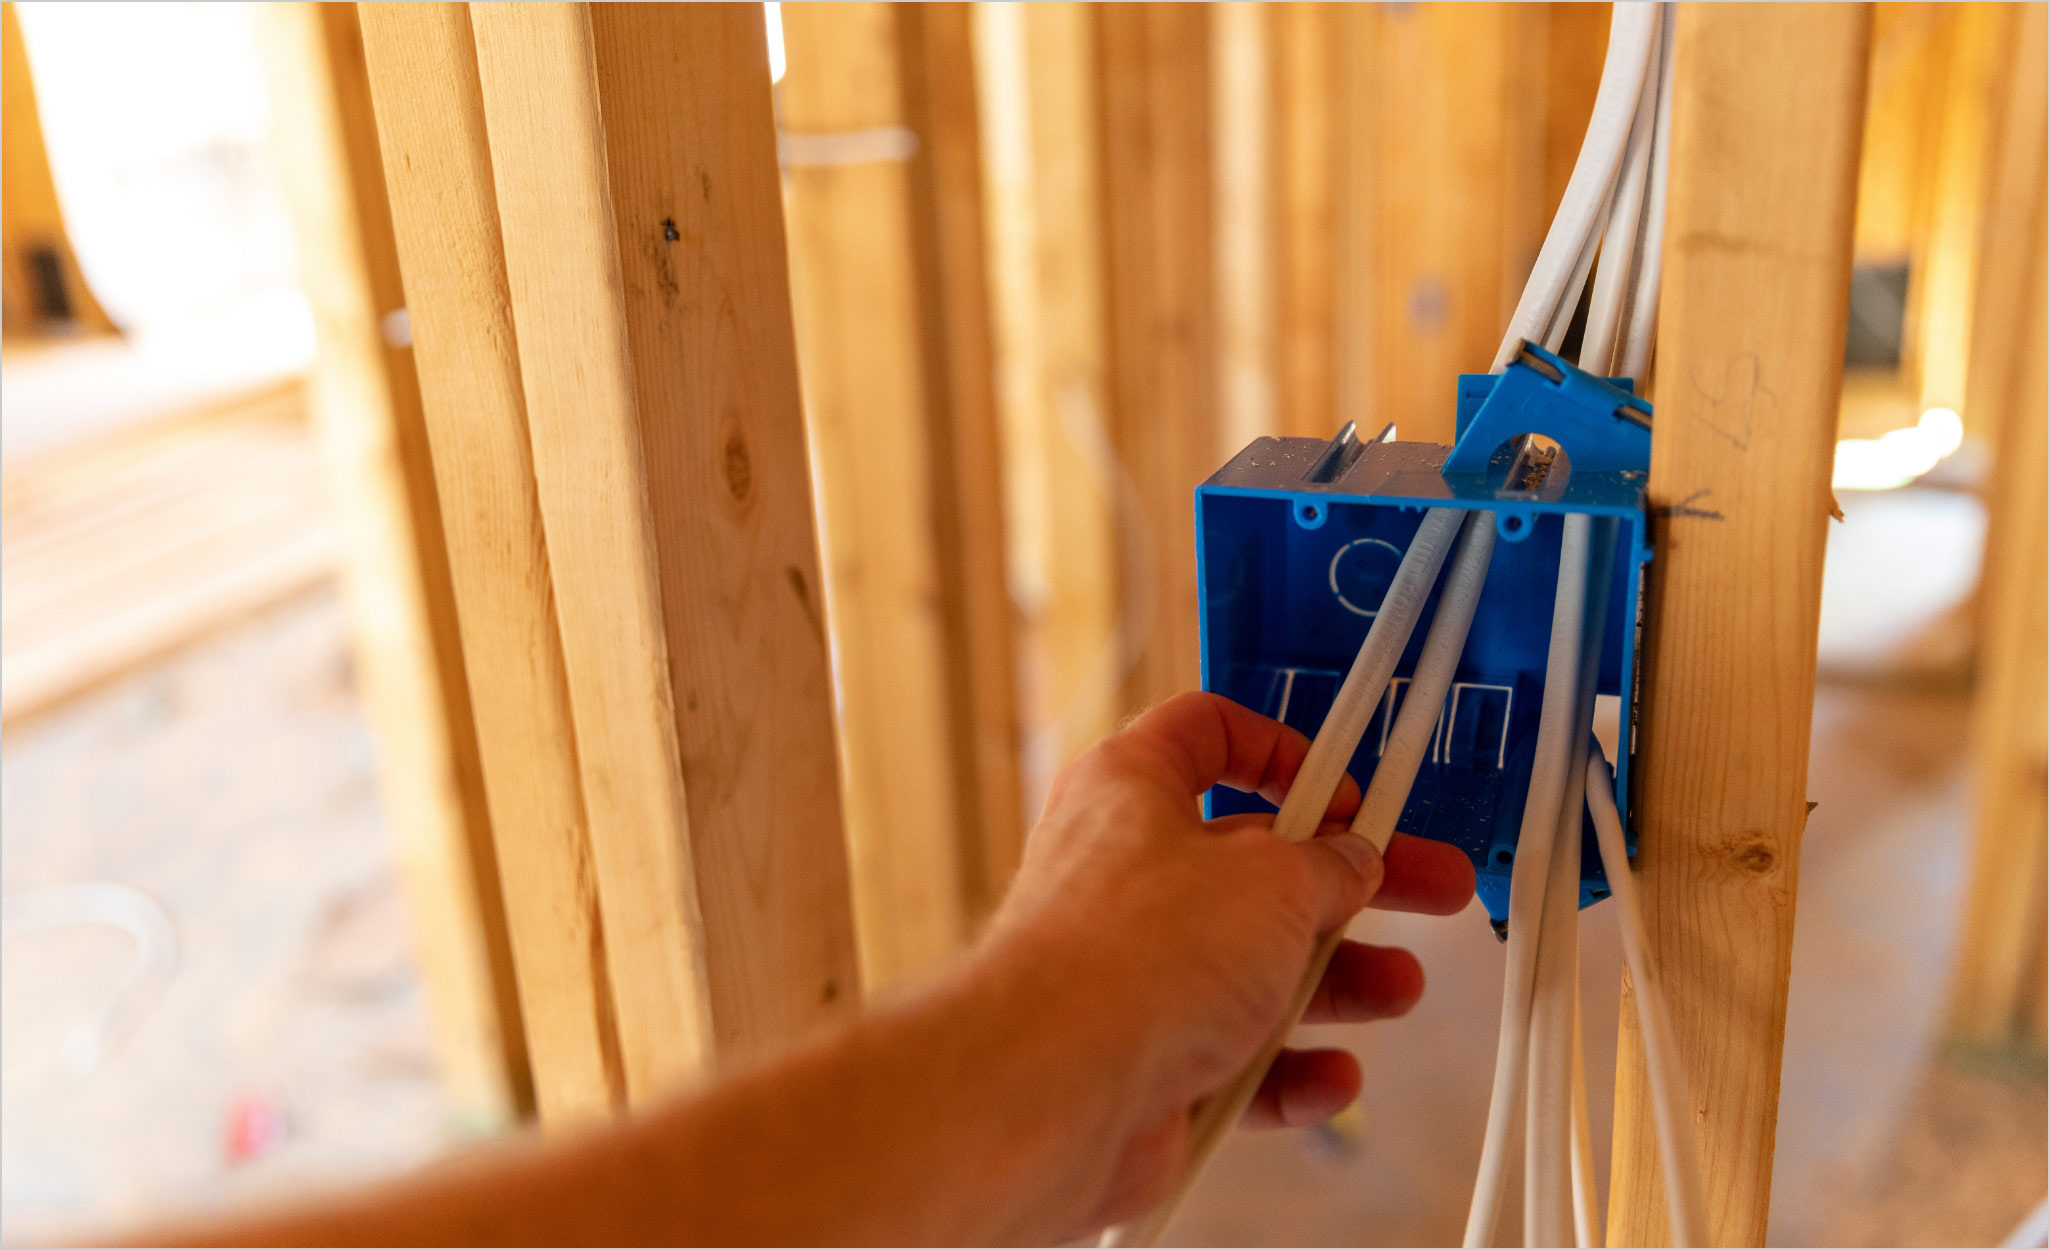 Residential Electrical Code Requirements The Home Depot